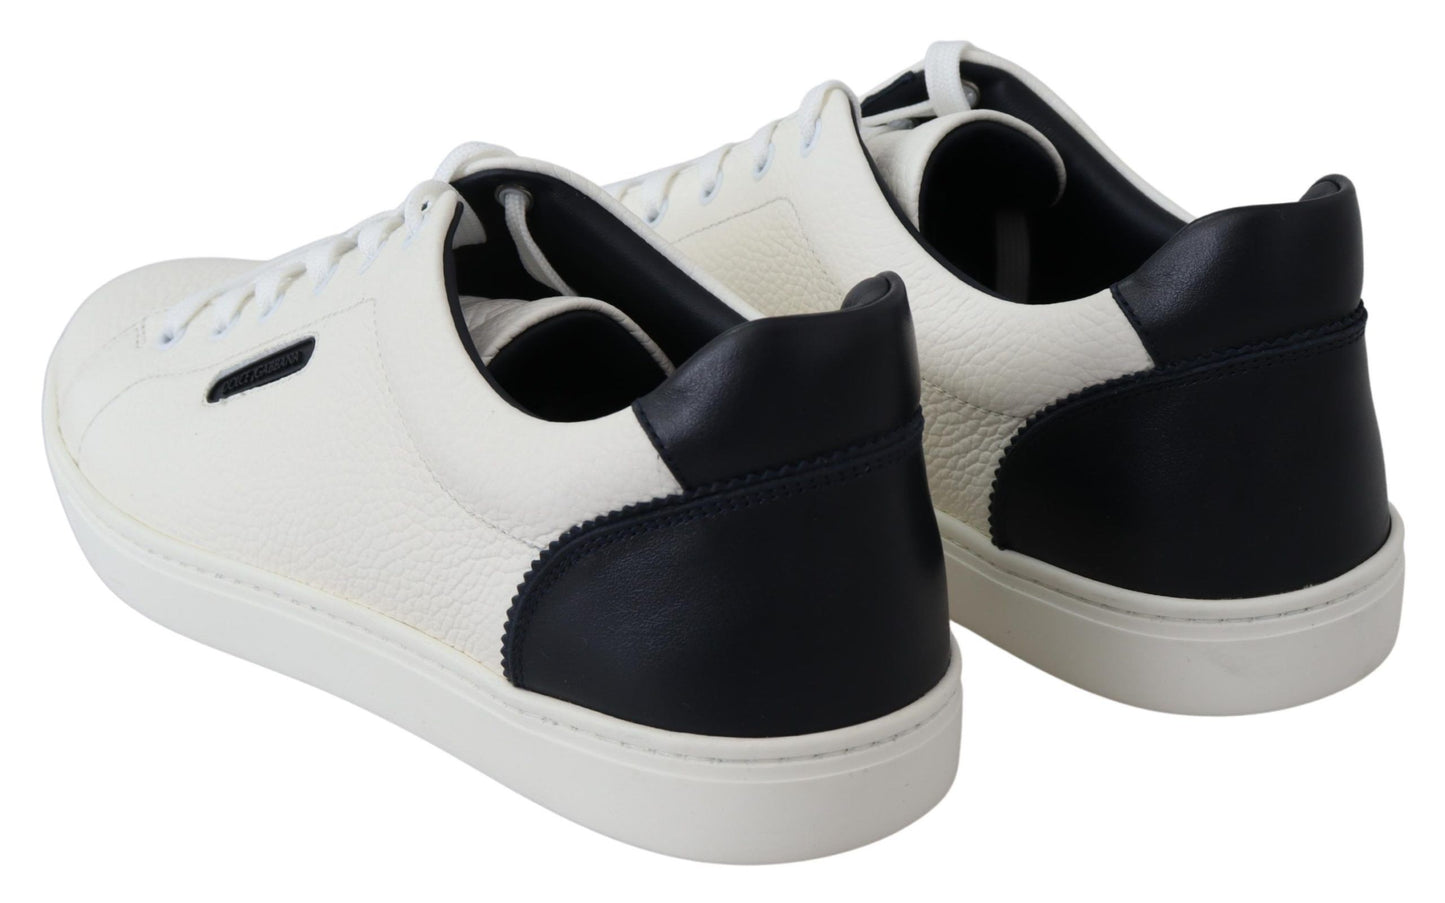 Elegant White & Blue Leather Low-Top Sneakers